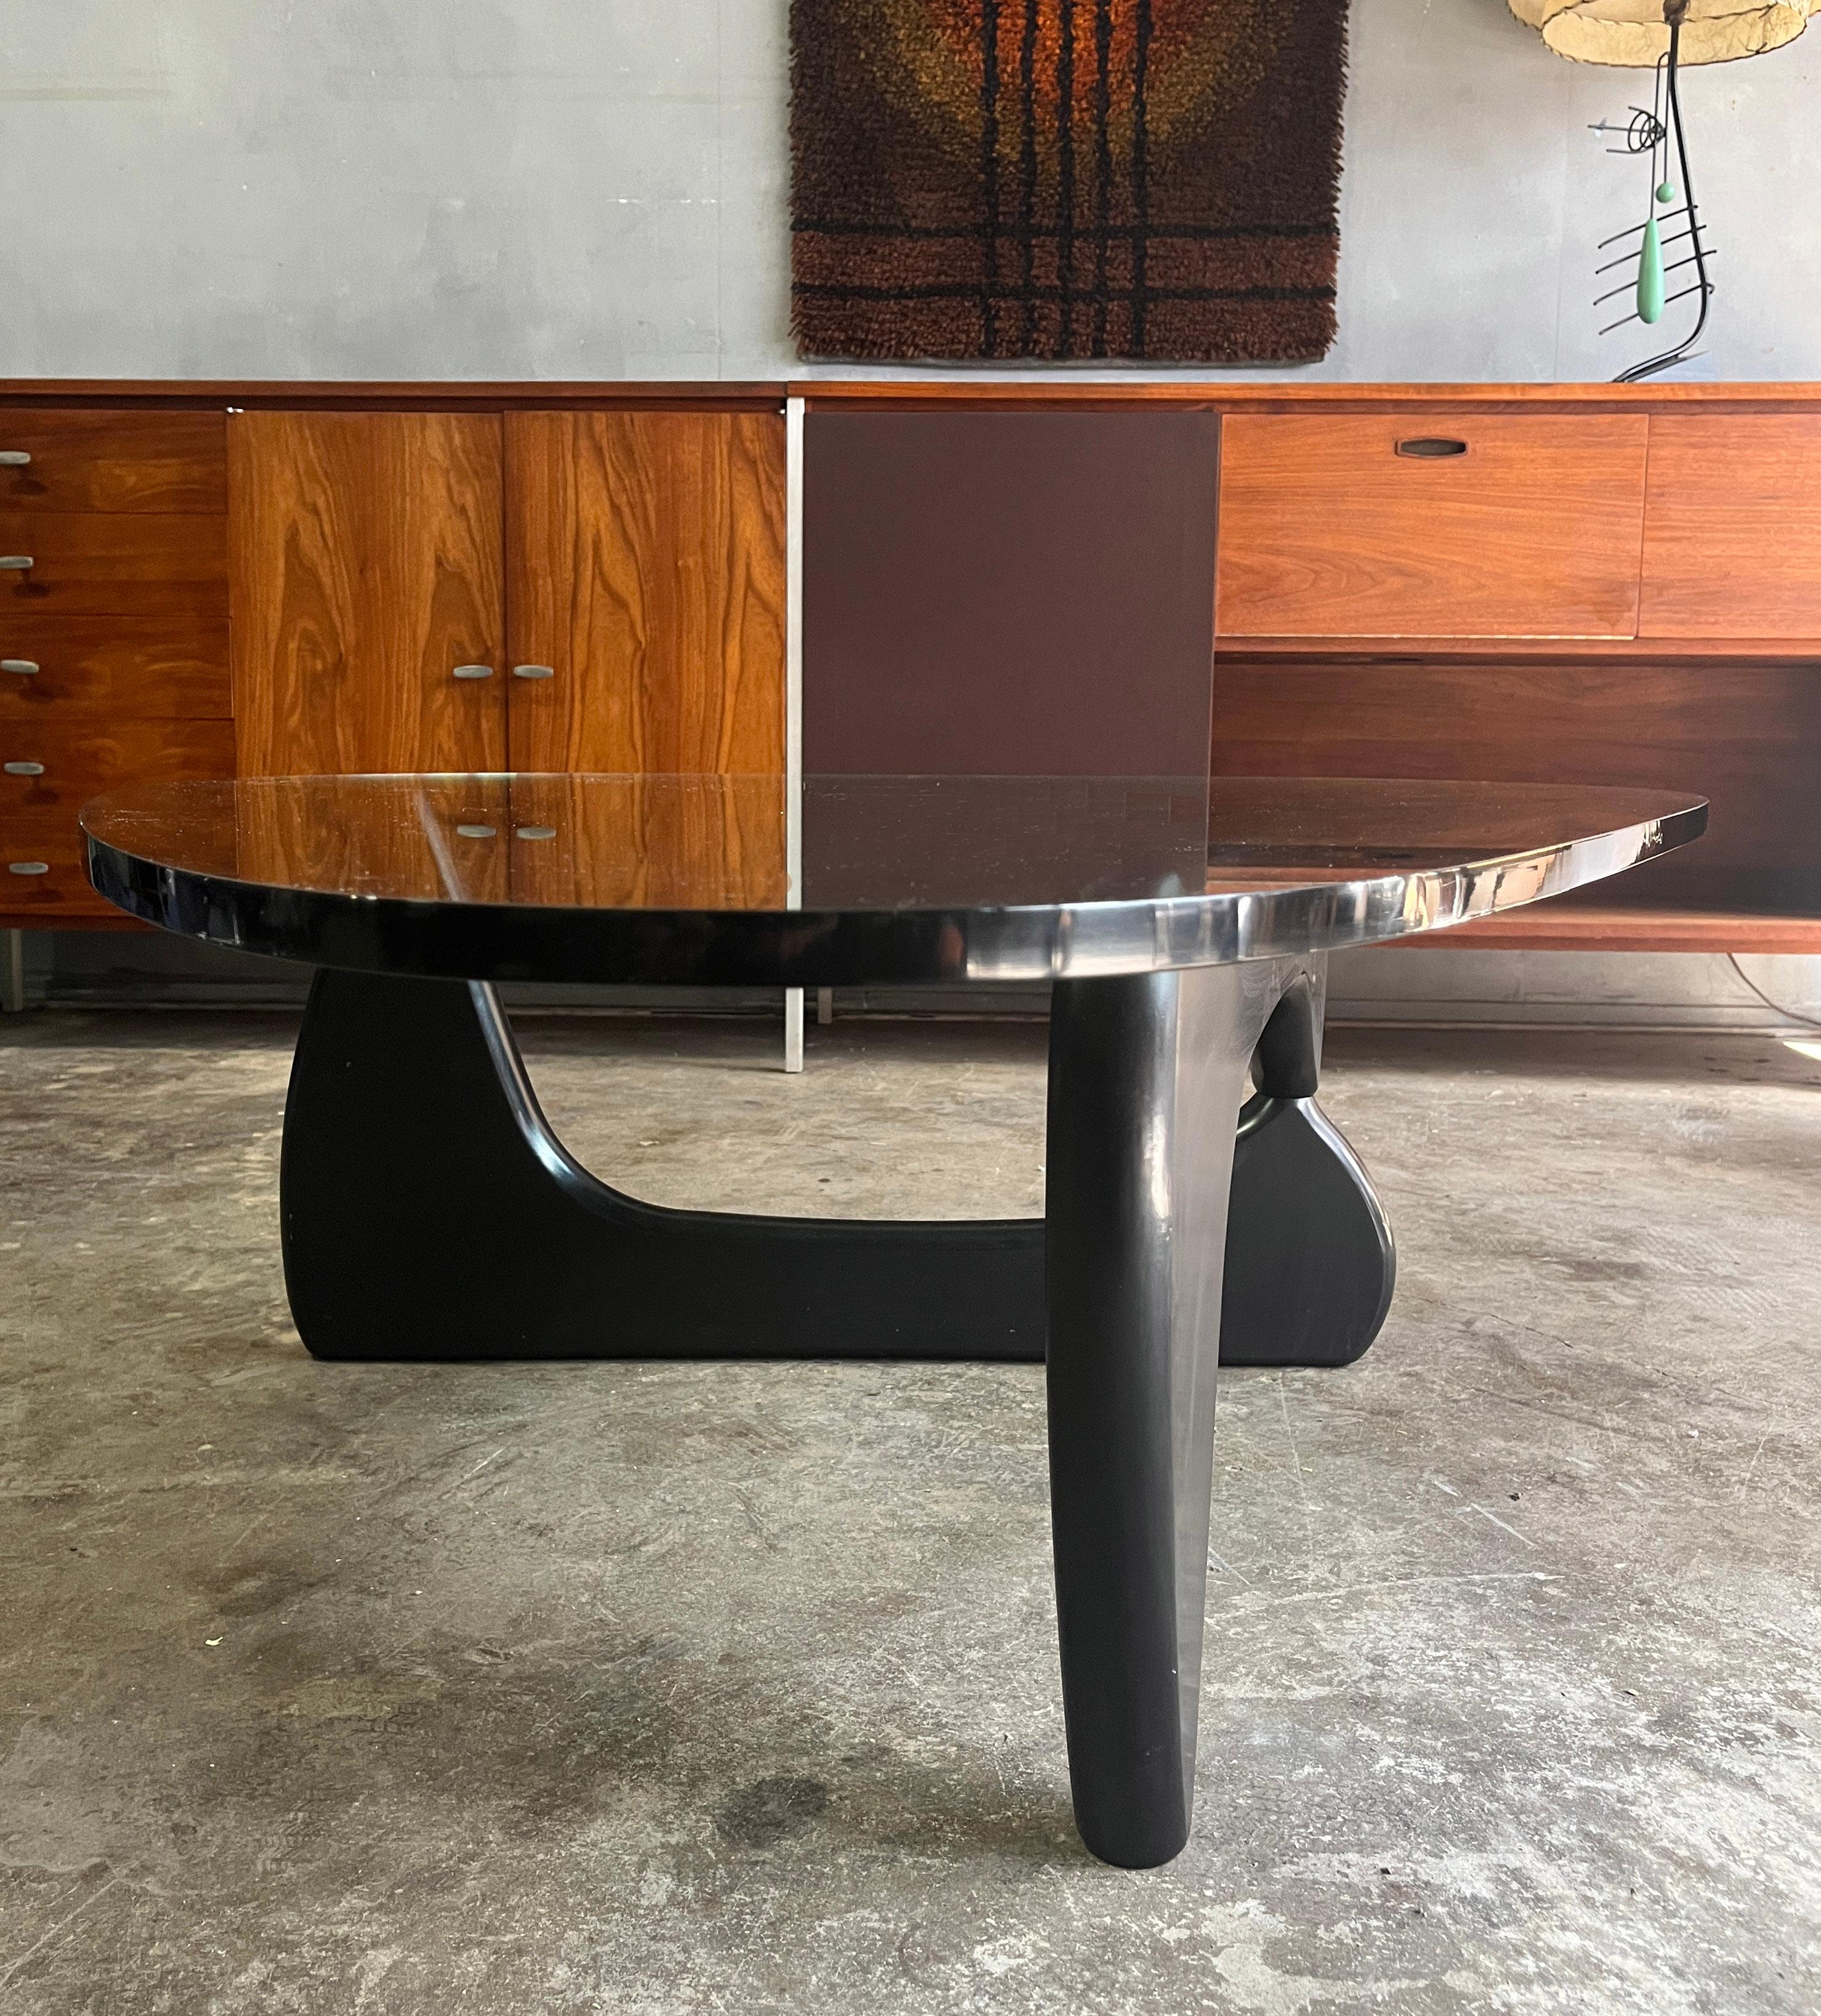 Midcentury Coffee Table IN-50 Designed by Isamu Noguchi for Herman Miller, circa 1940s. An icon in the furniture world. The two curved, wooden shapes that comprise the base are mirror images inverted to provide support to the triangular glass top.